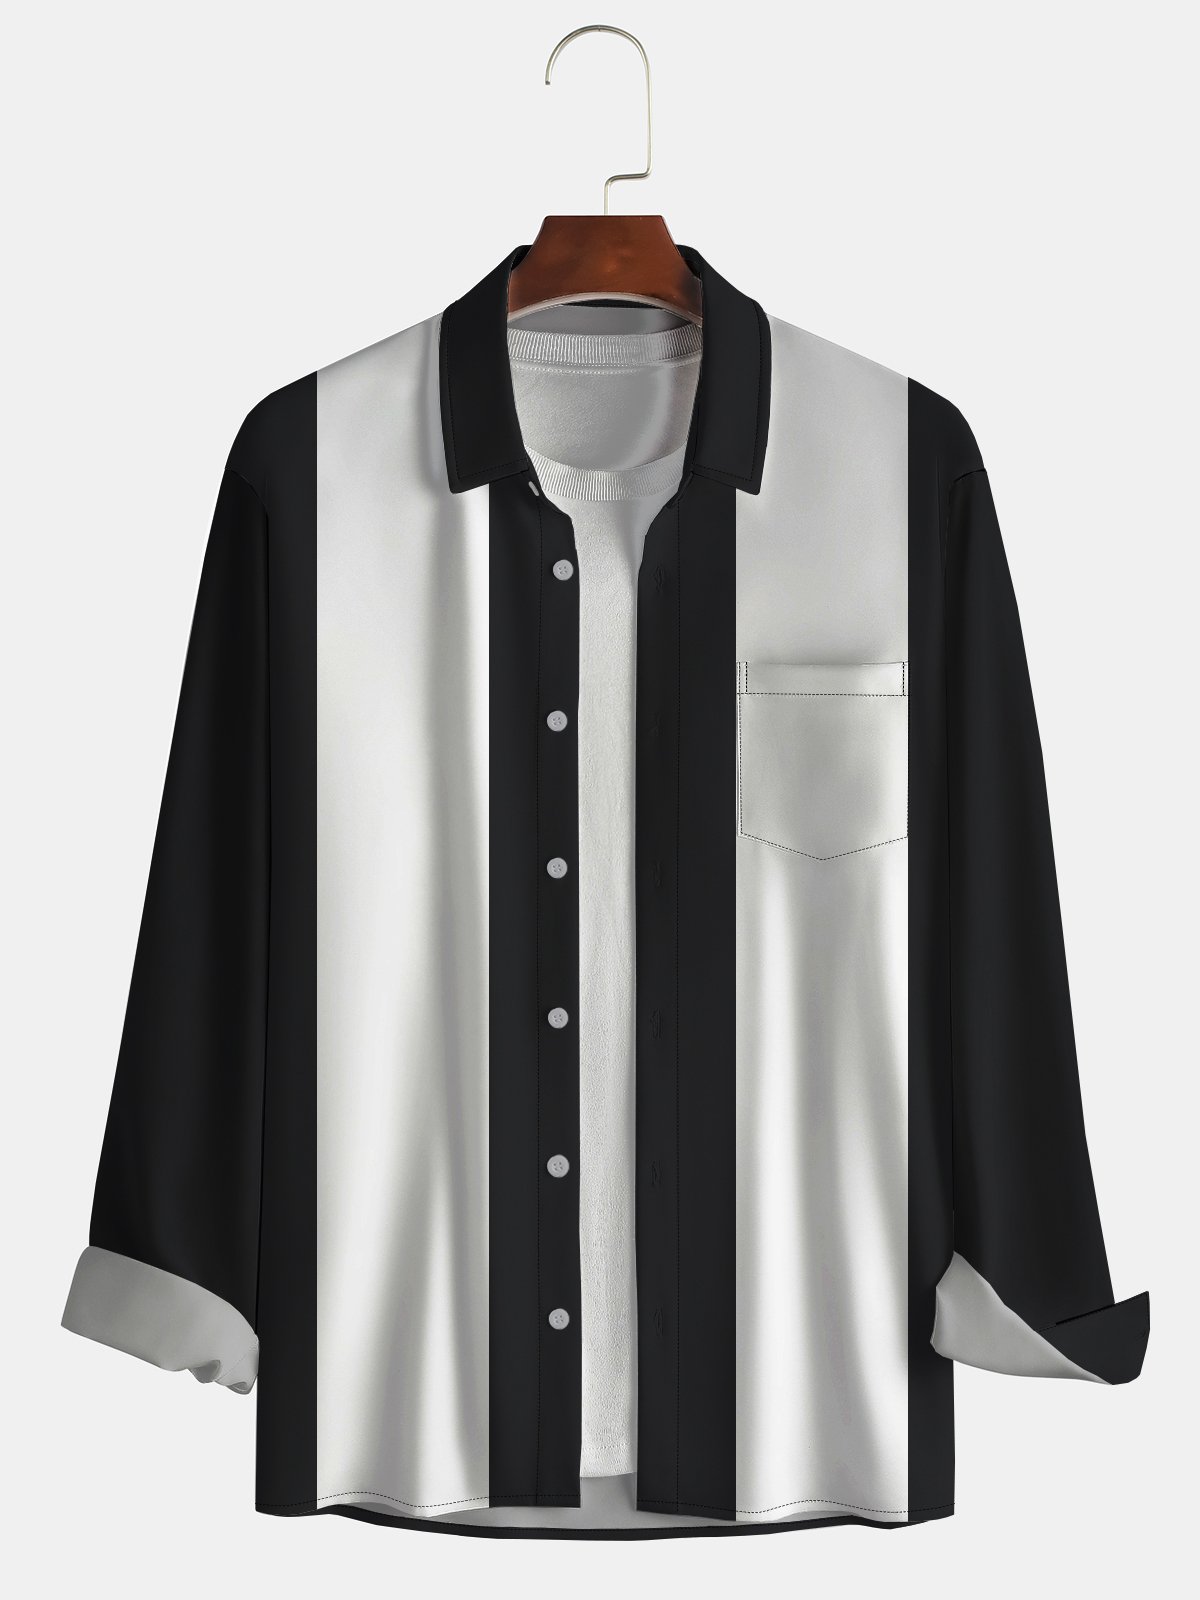 Mens Front Buttons Soft Breathable Chest Pocket Casual Bowling Shirts